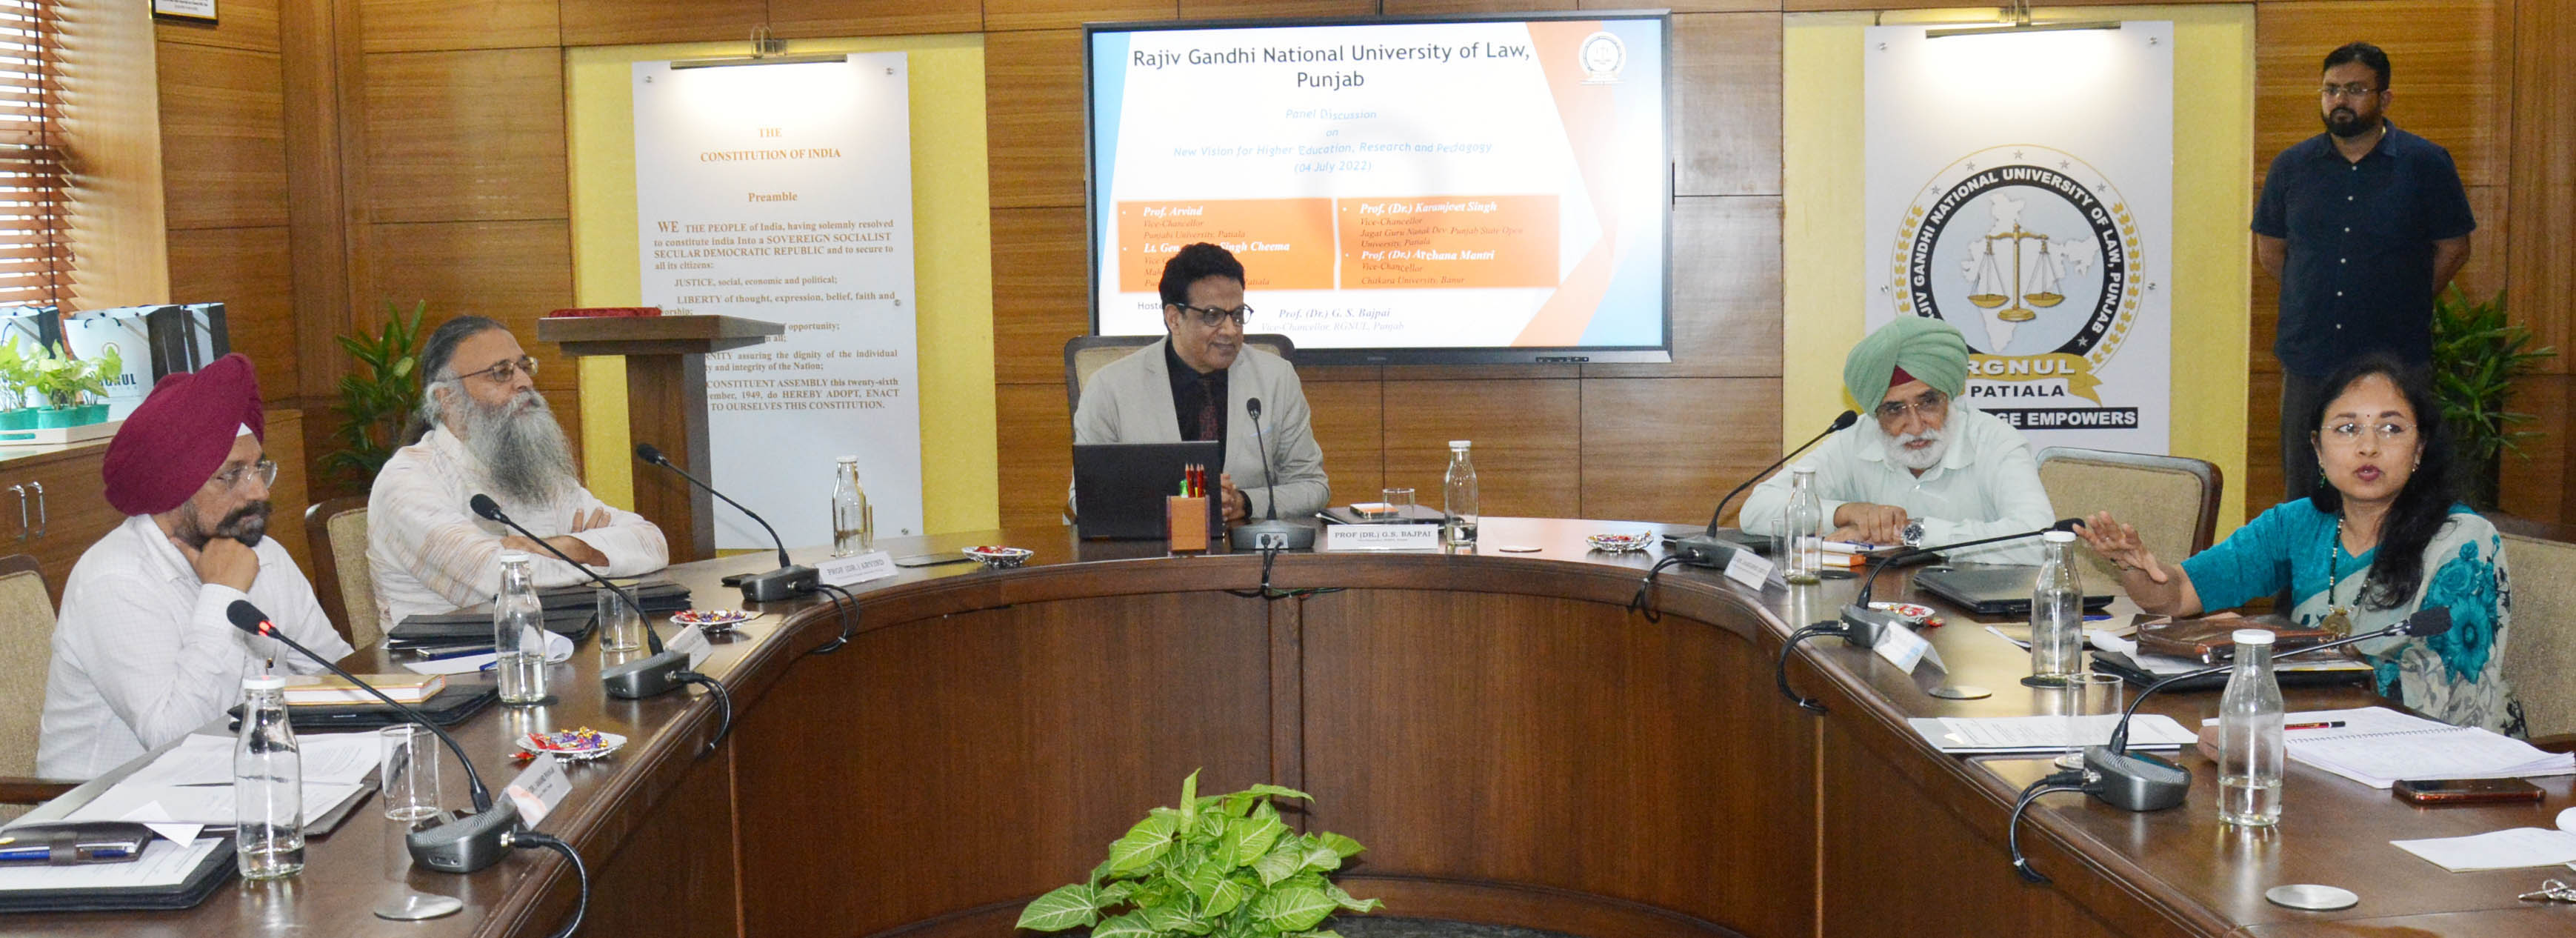 Vice-Chancellors discuss new vision for higher education, research & pedagogy in Patiala